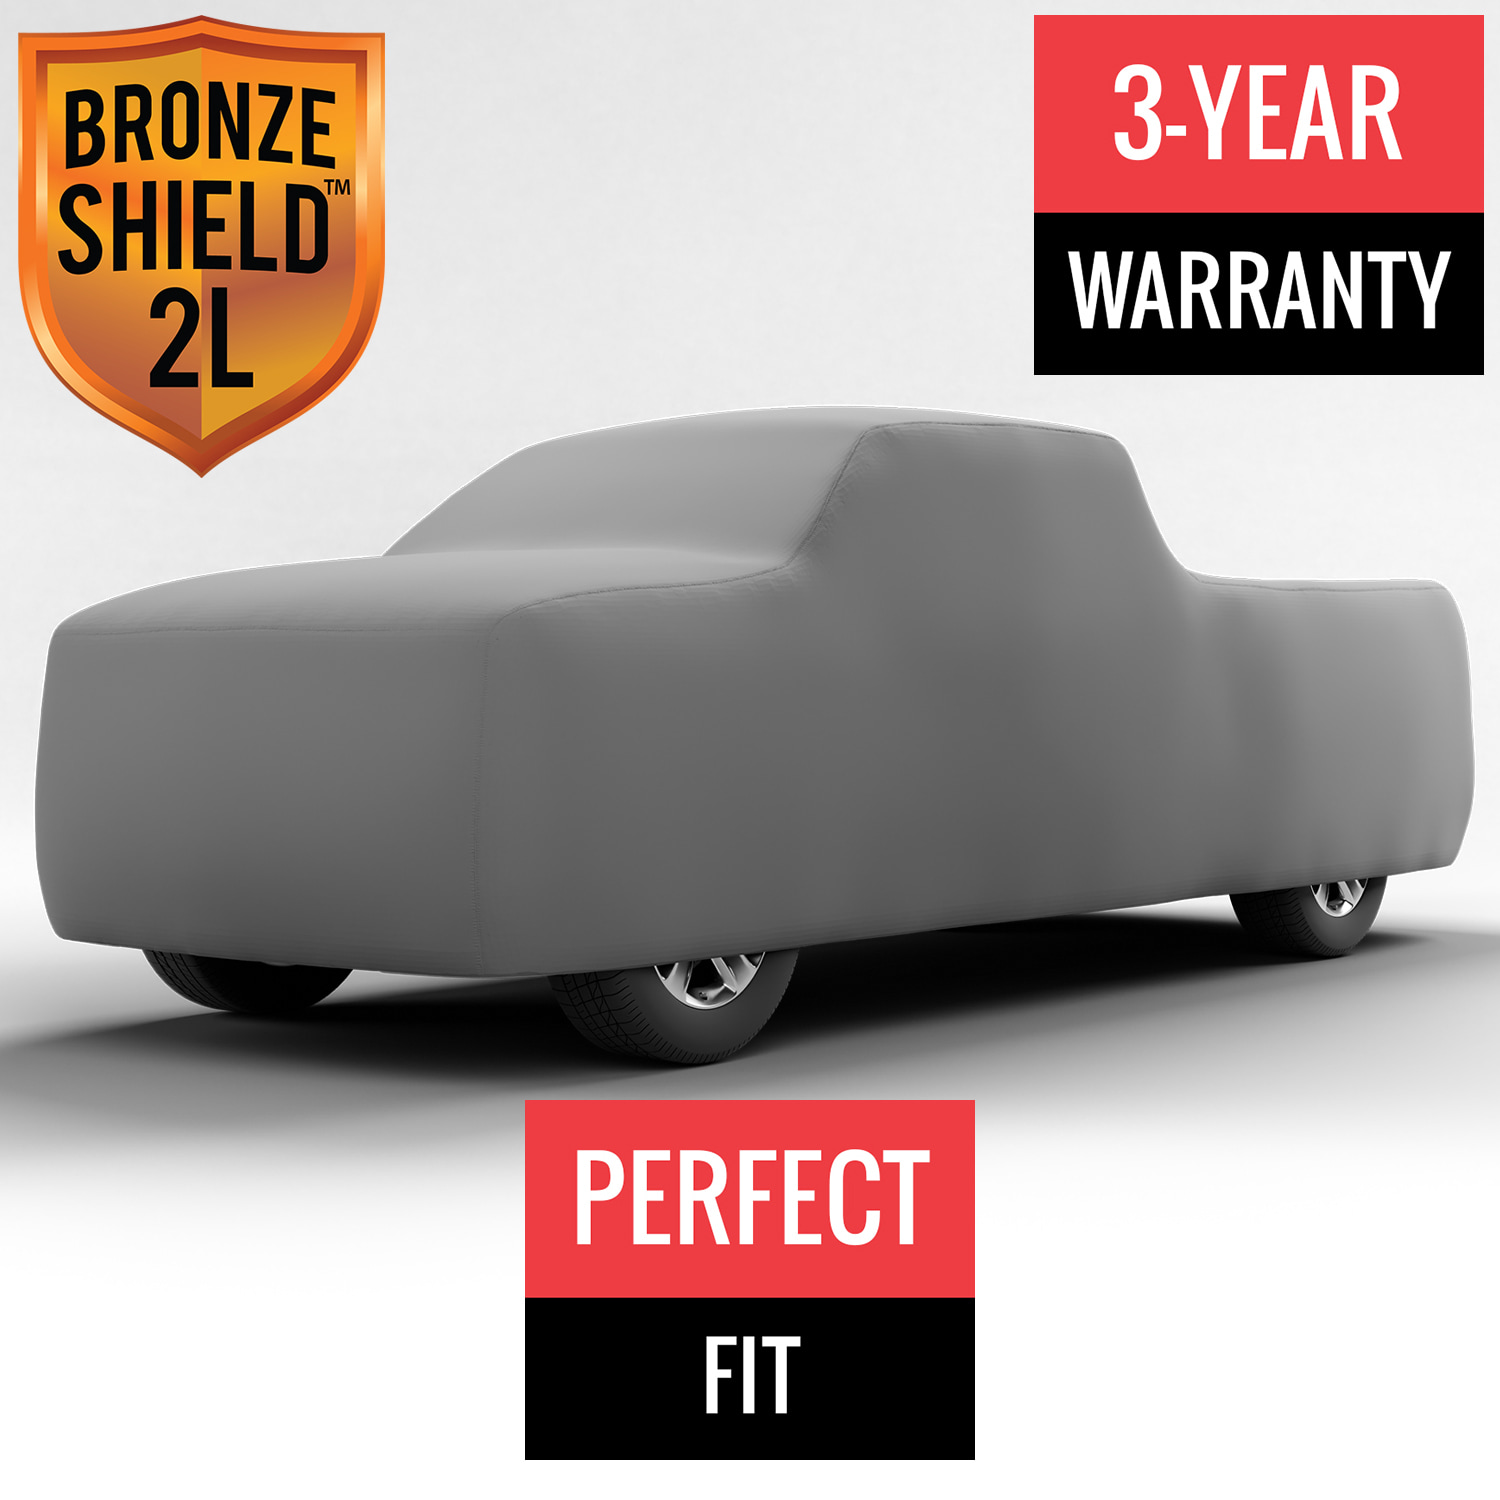 Bronze Shield 2L - Car Cover for GMC K15 Pickup 1974 Crew Cab Pickup 8.0 Feet Bed